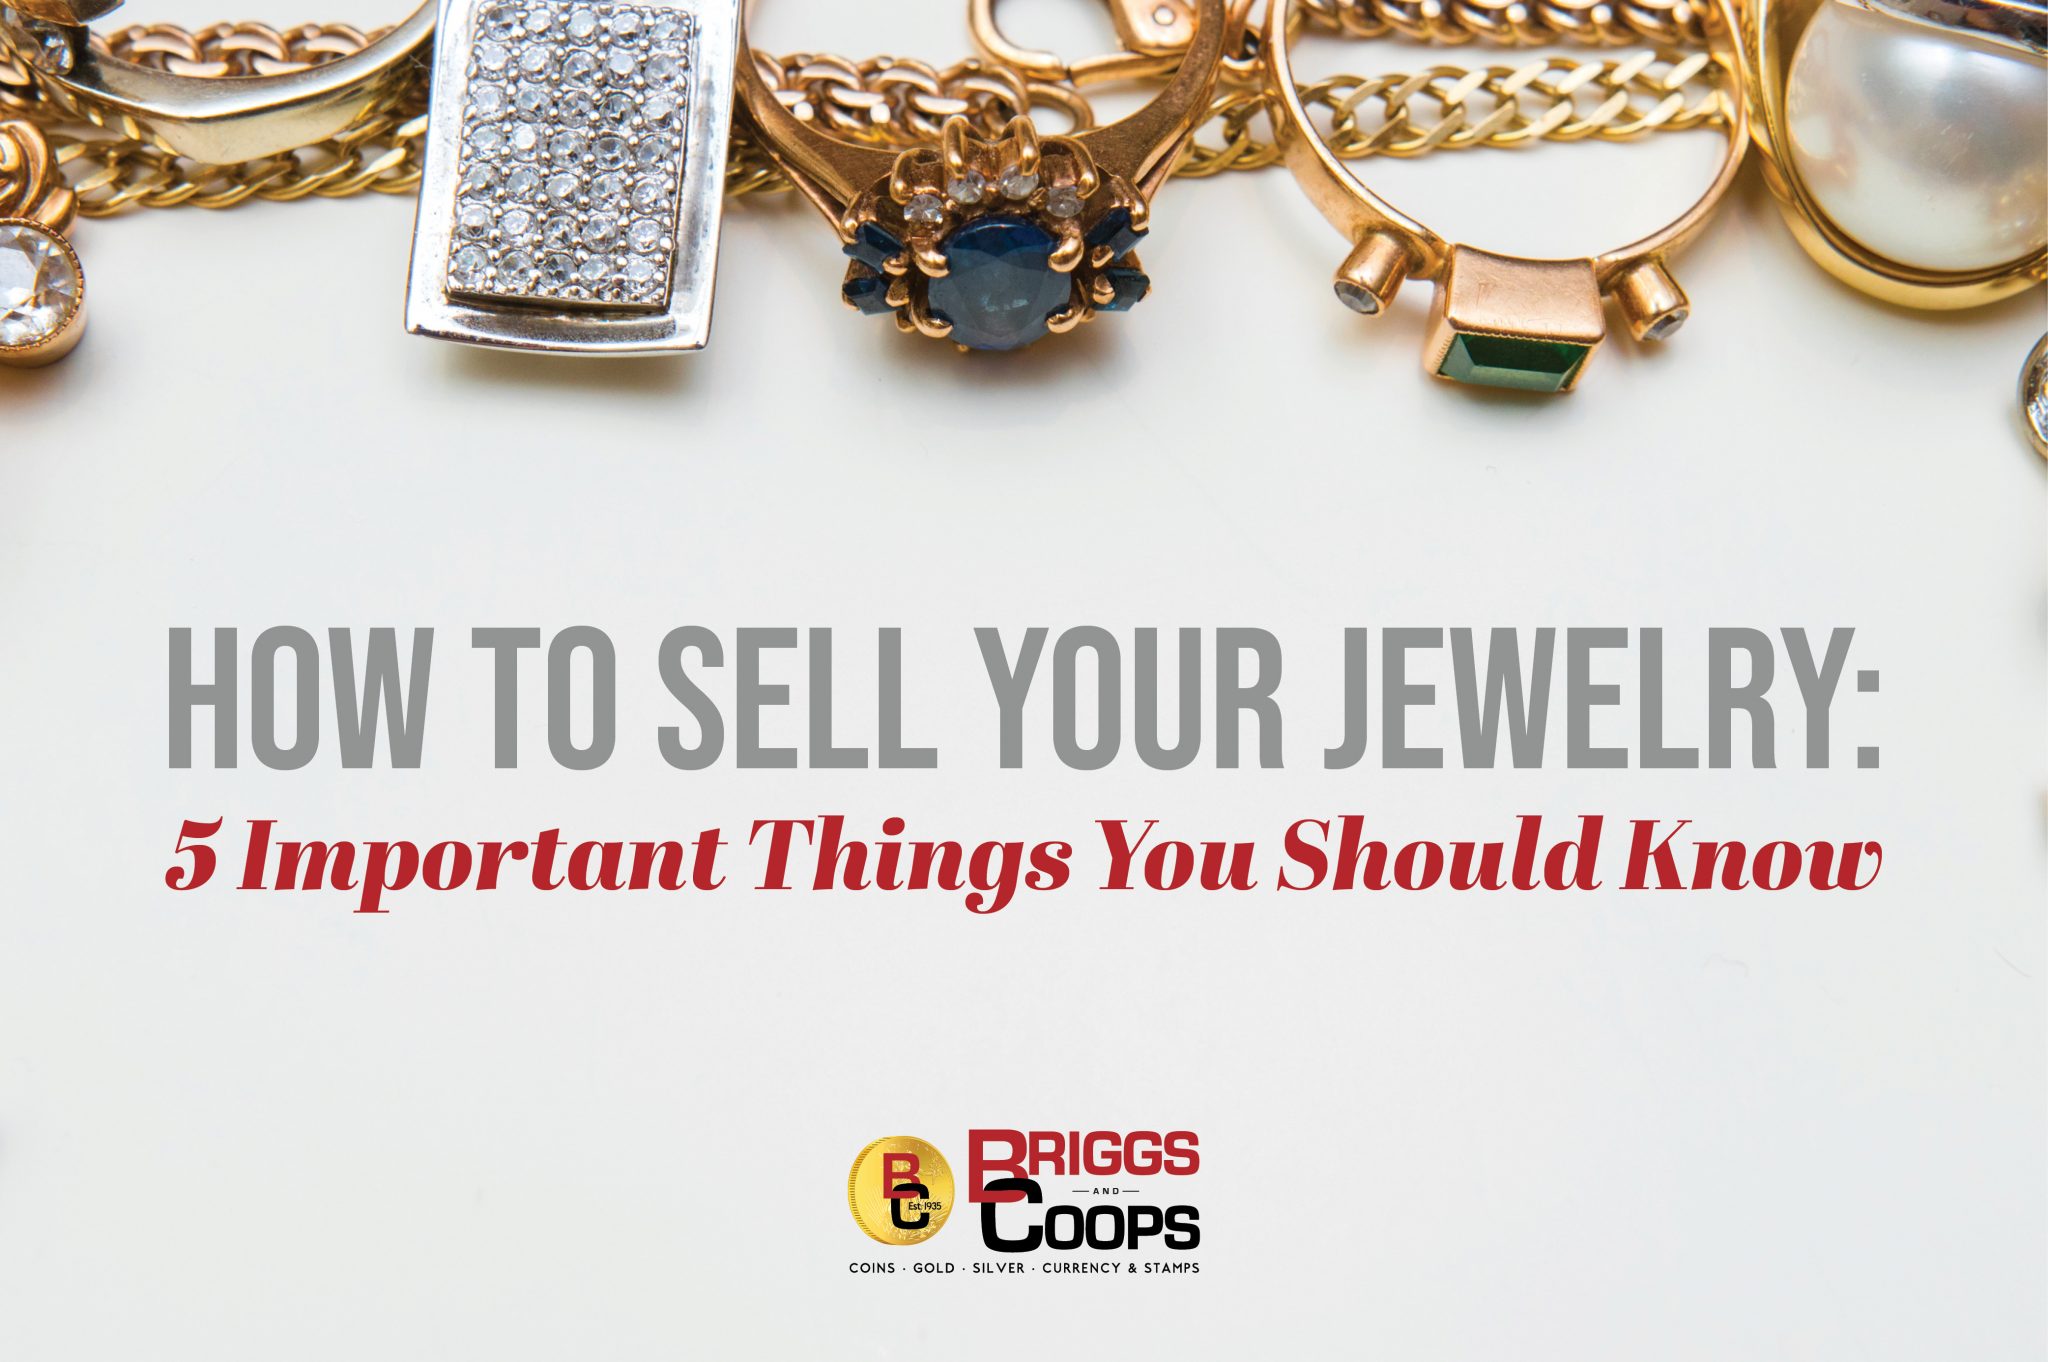 5 Tips for How to Find the Right Jewelry Buyers for You